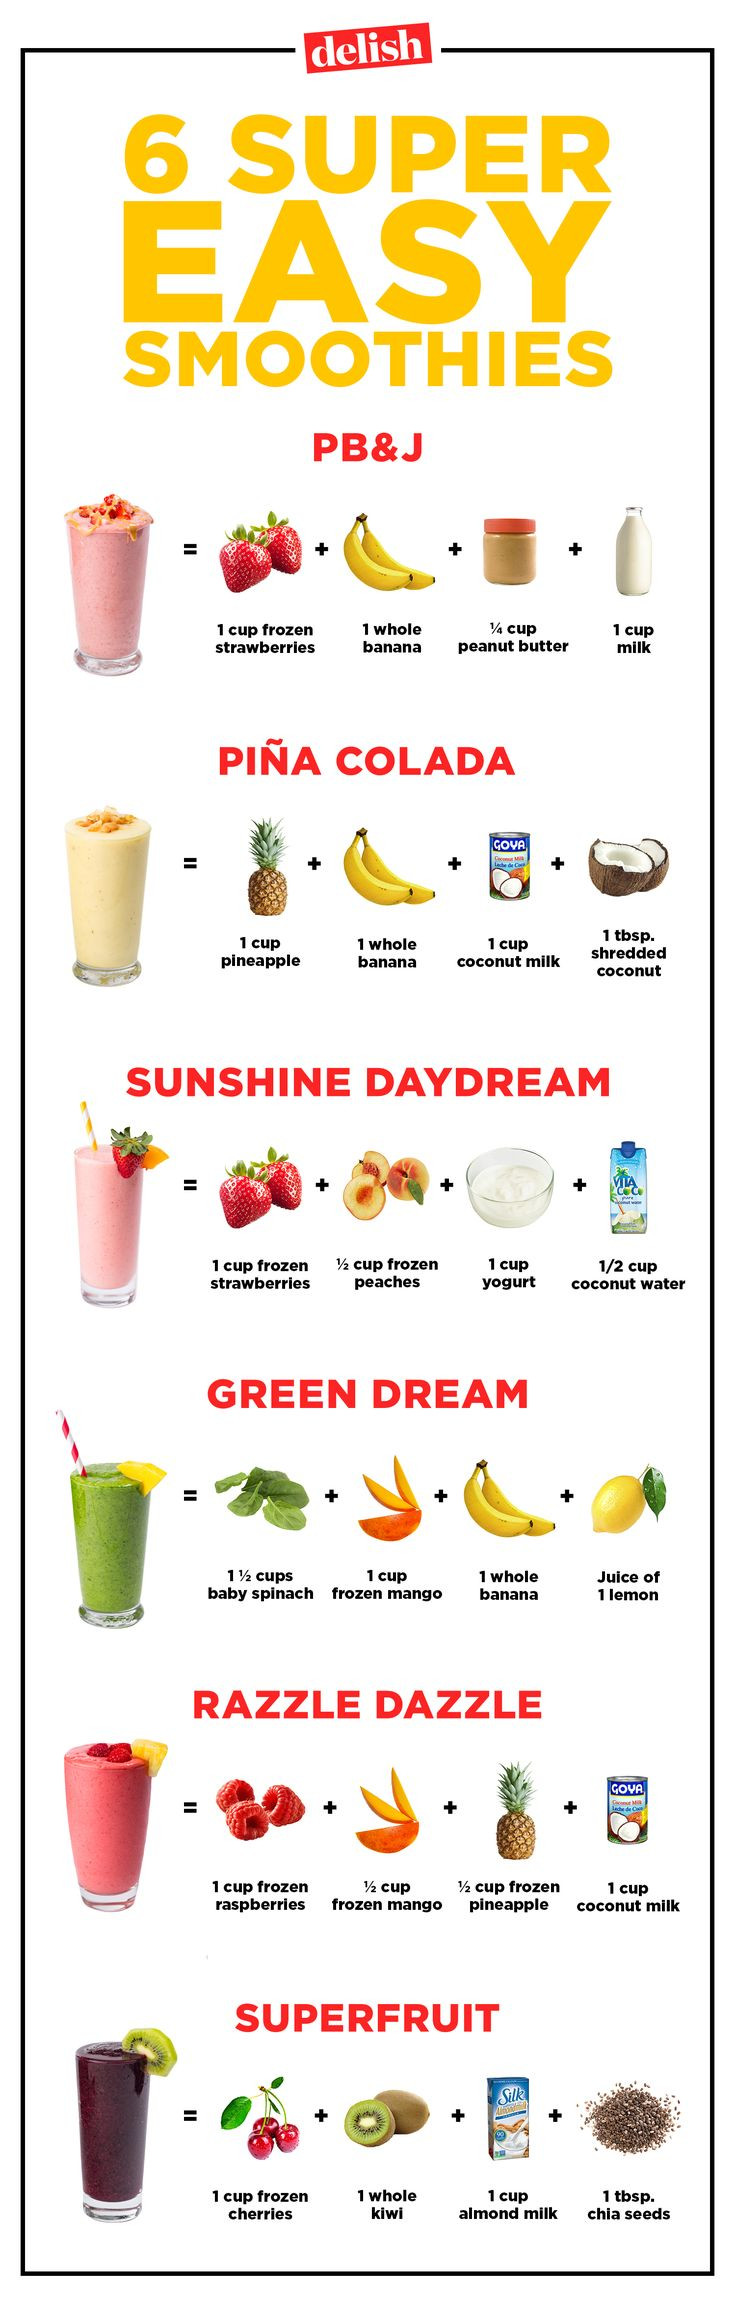 Easy Healthy Smoothie Recipes
 13 best images about Organization & Study Motivation on